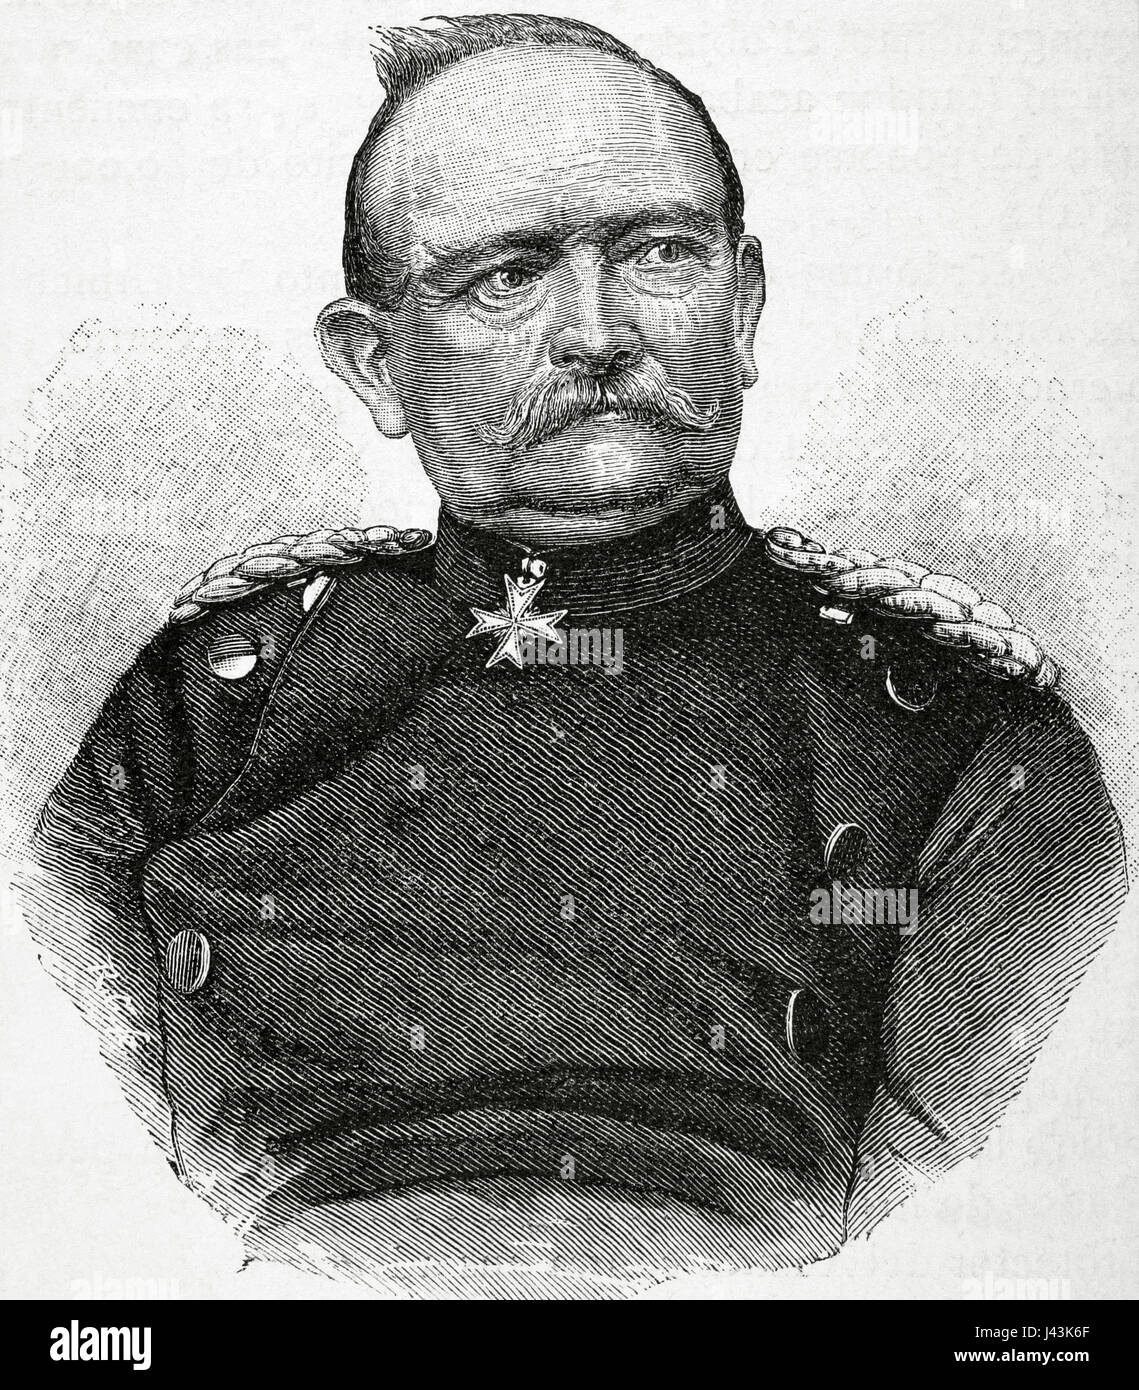 Eduard von Fransecky (1807-1890). Prussian general. Portrait. Engraving by R. Cremer. 'Historia Univeersal', 1883. Stock Photo